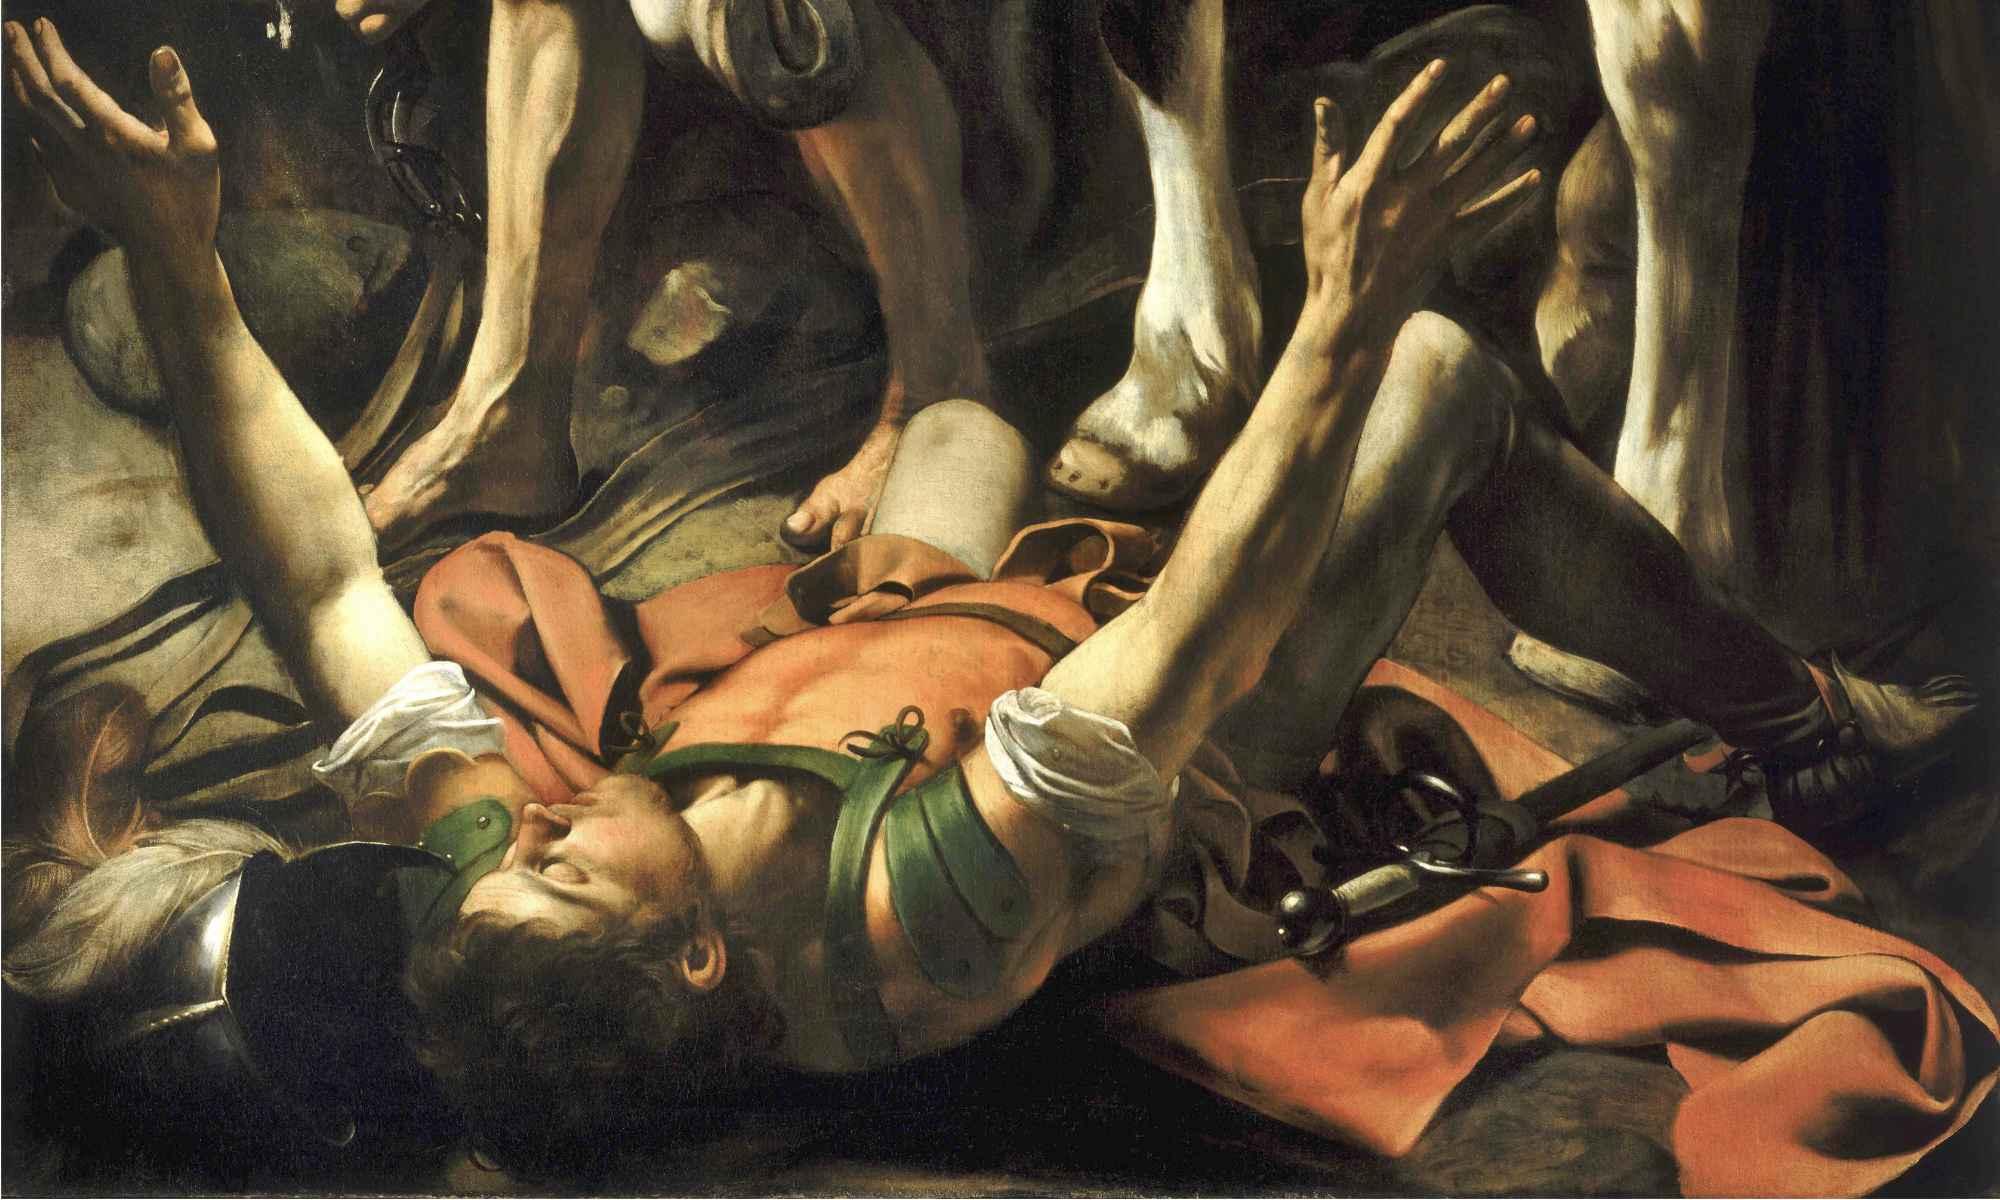 Detail of Caravaggio's "The Conversion of Saint Paul" shows Saul sprawled on the ground beneath a horse's legs, 双目失明，双臂高举. A crop of the painting serves as the cover art for Jennifer Grotz's "Still Falling: Poems."